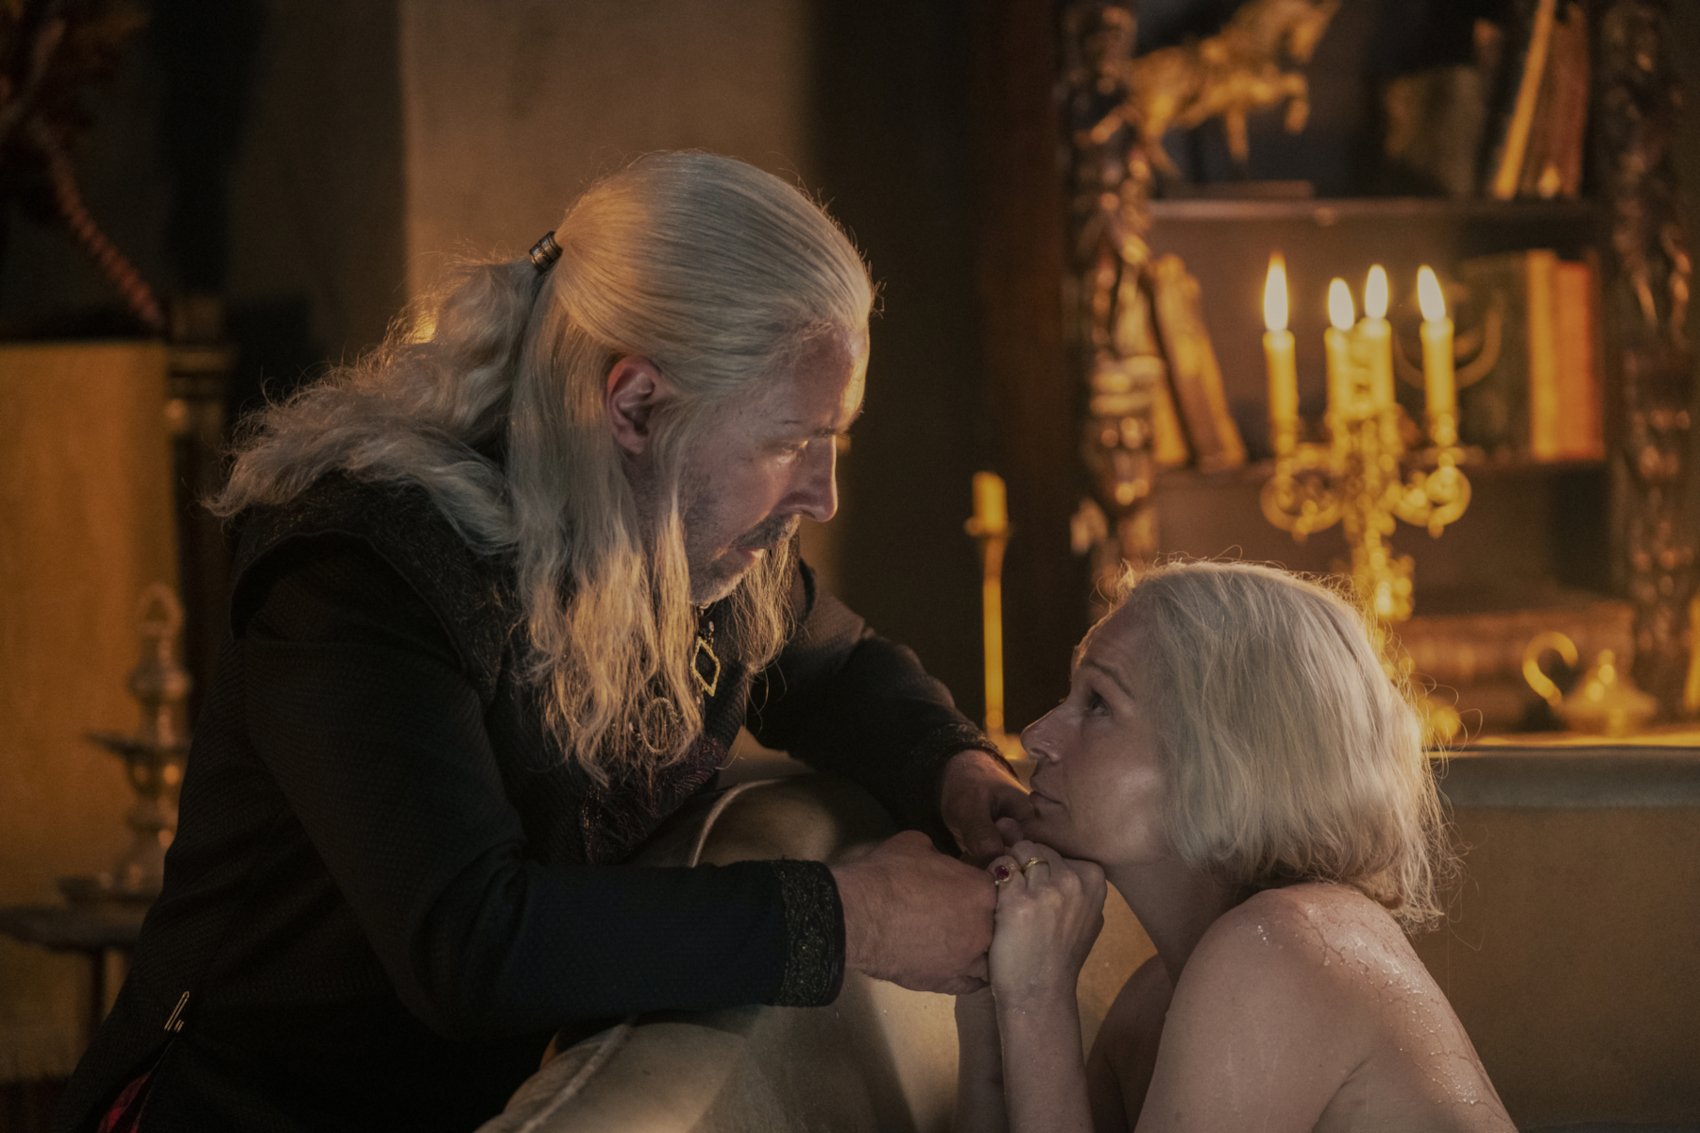 Paddy Considine and Sian Brooke as Viserys Targaryen and Aemma Arryn in 'House of the Dragon,' which showrunner Miguel Sapochnik says approaches violence 'thoughtfully.' Aemma is in the tub, and Viserys is leaning over it from outside. They're both staring at one another.